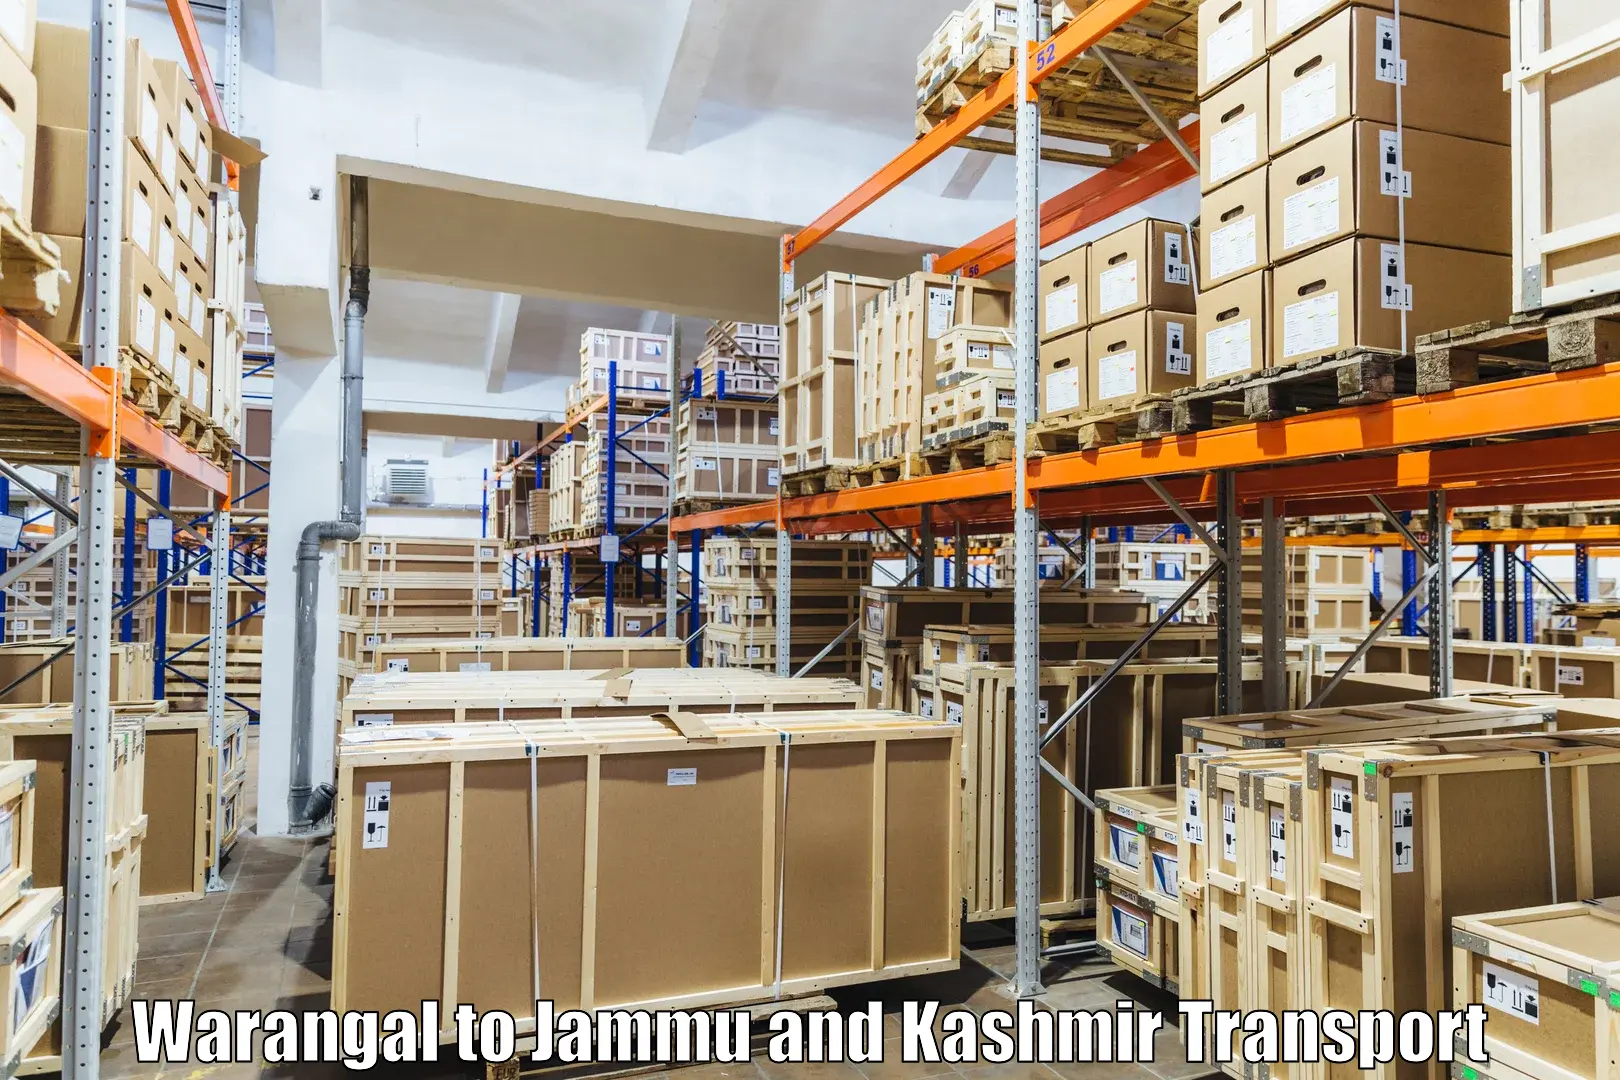 Daily parcel service transport in Warangal to Rajouri